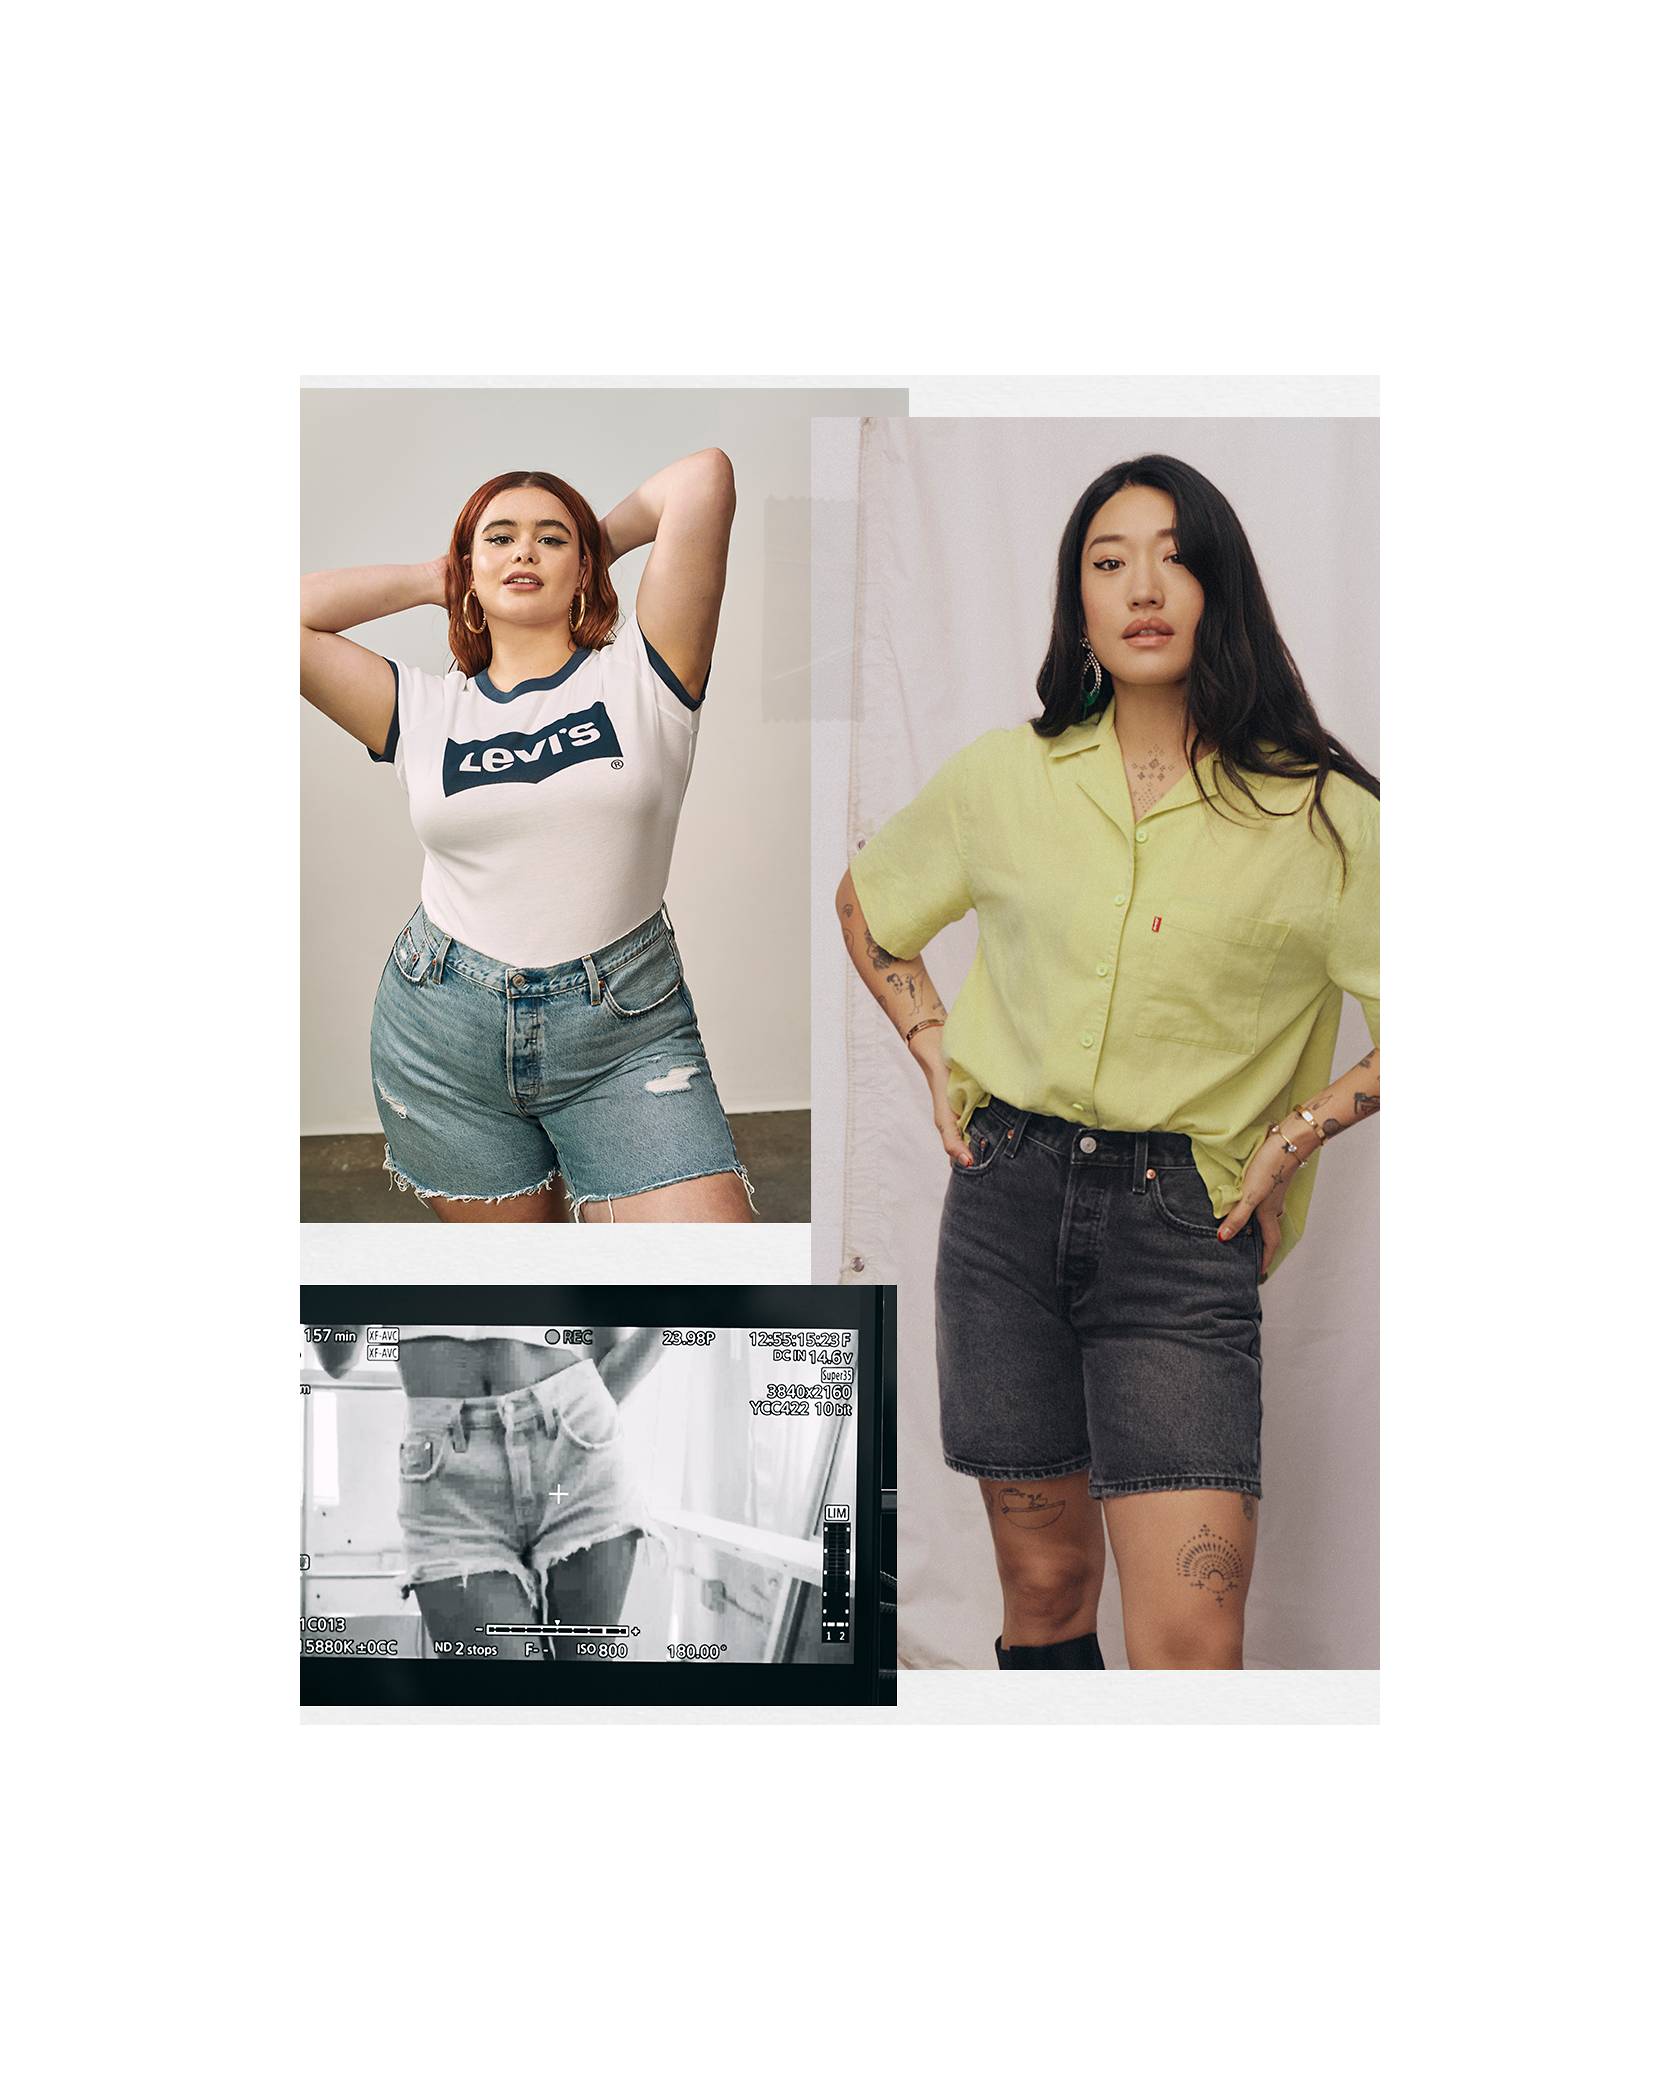 Levis 501® Jean shorts styled on Barbie Ferreira and Peggy Gou